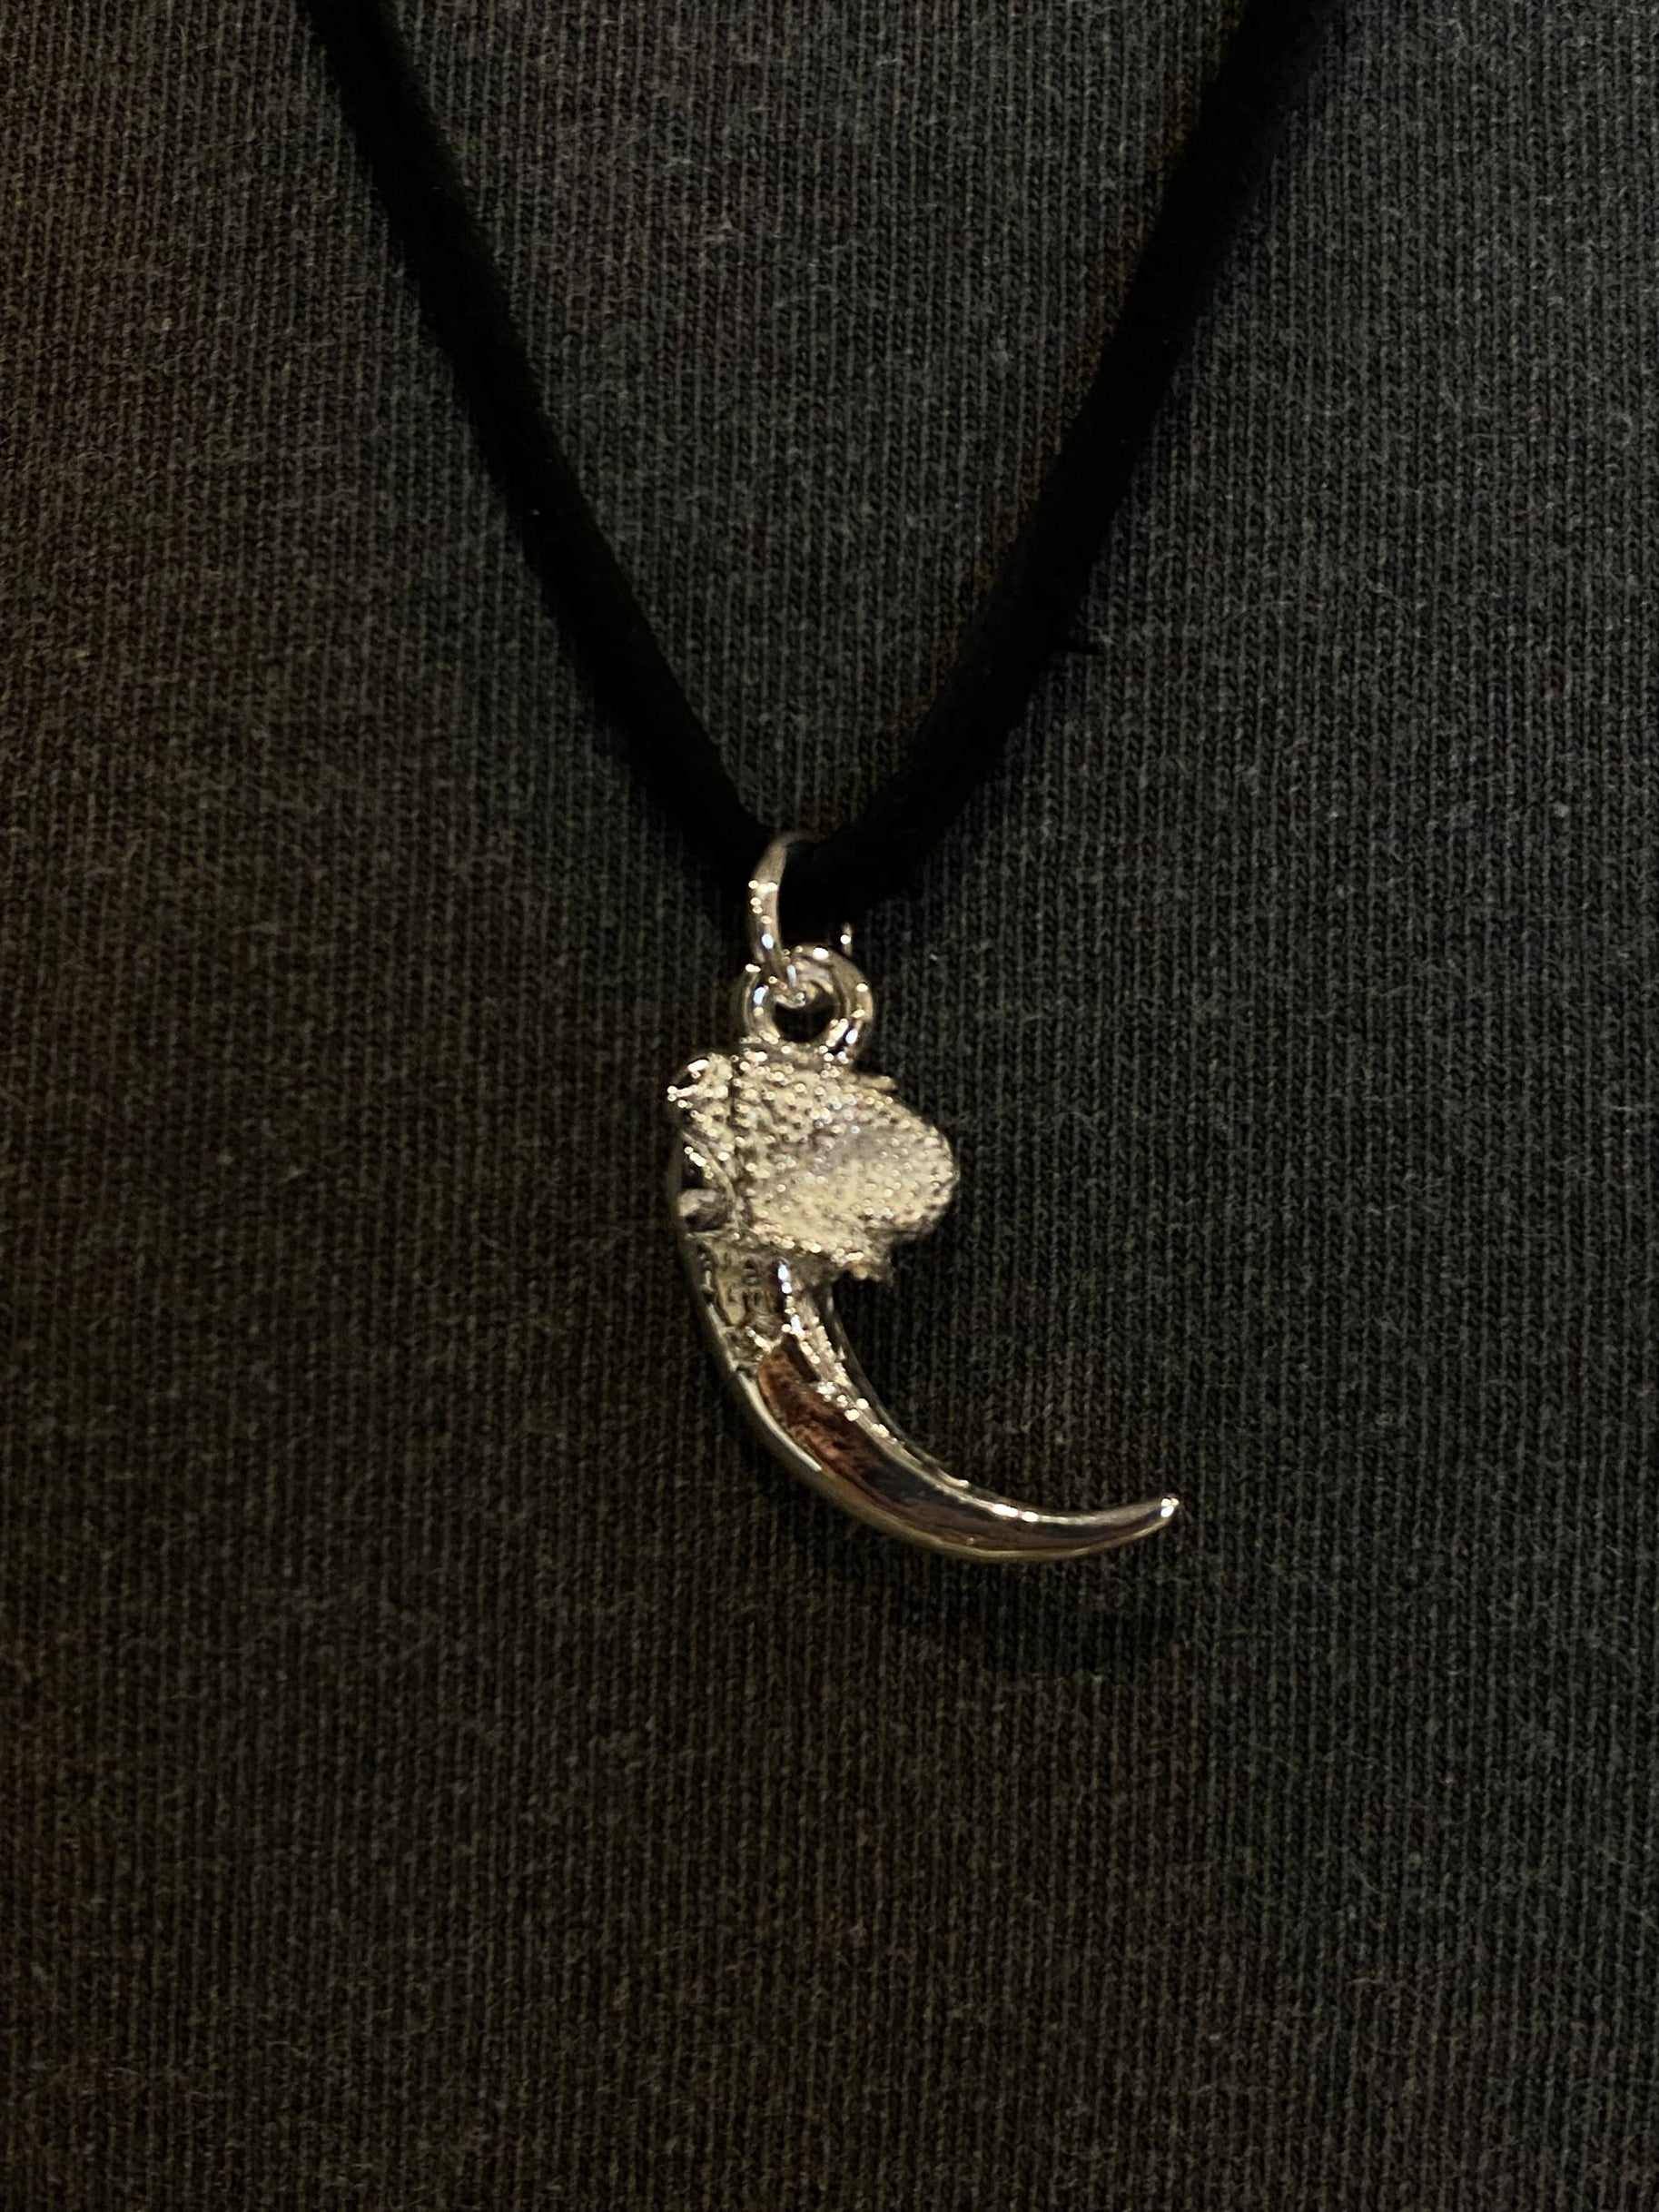 First Arrow's Size Small "Eagle Claw" Pendant (P-030)